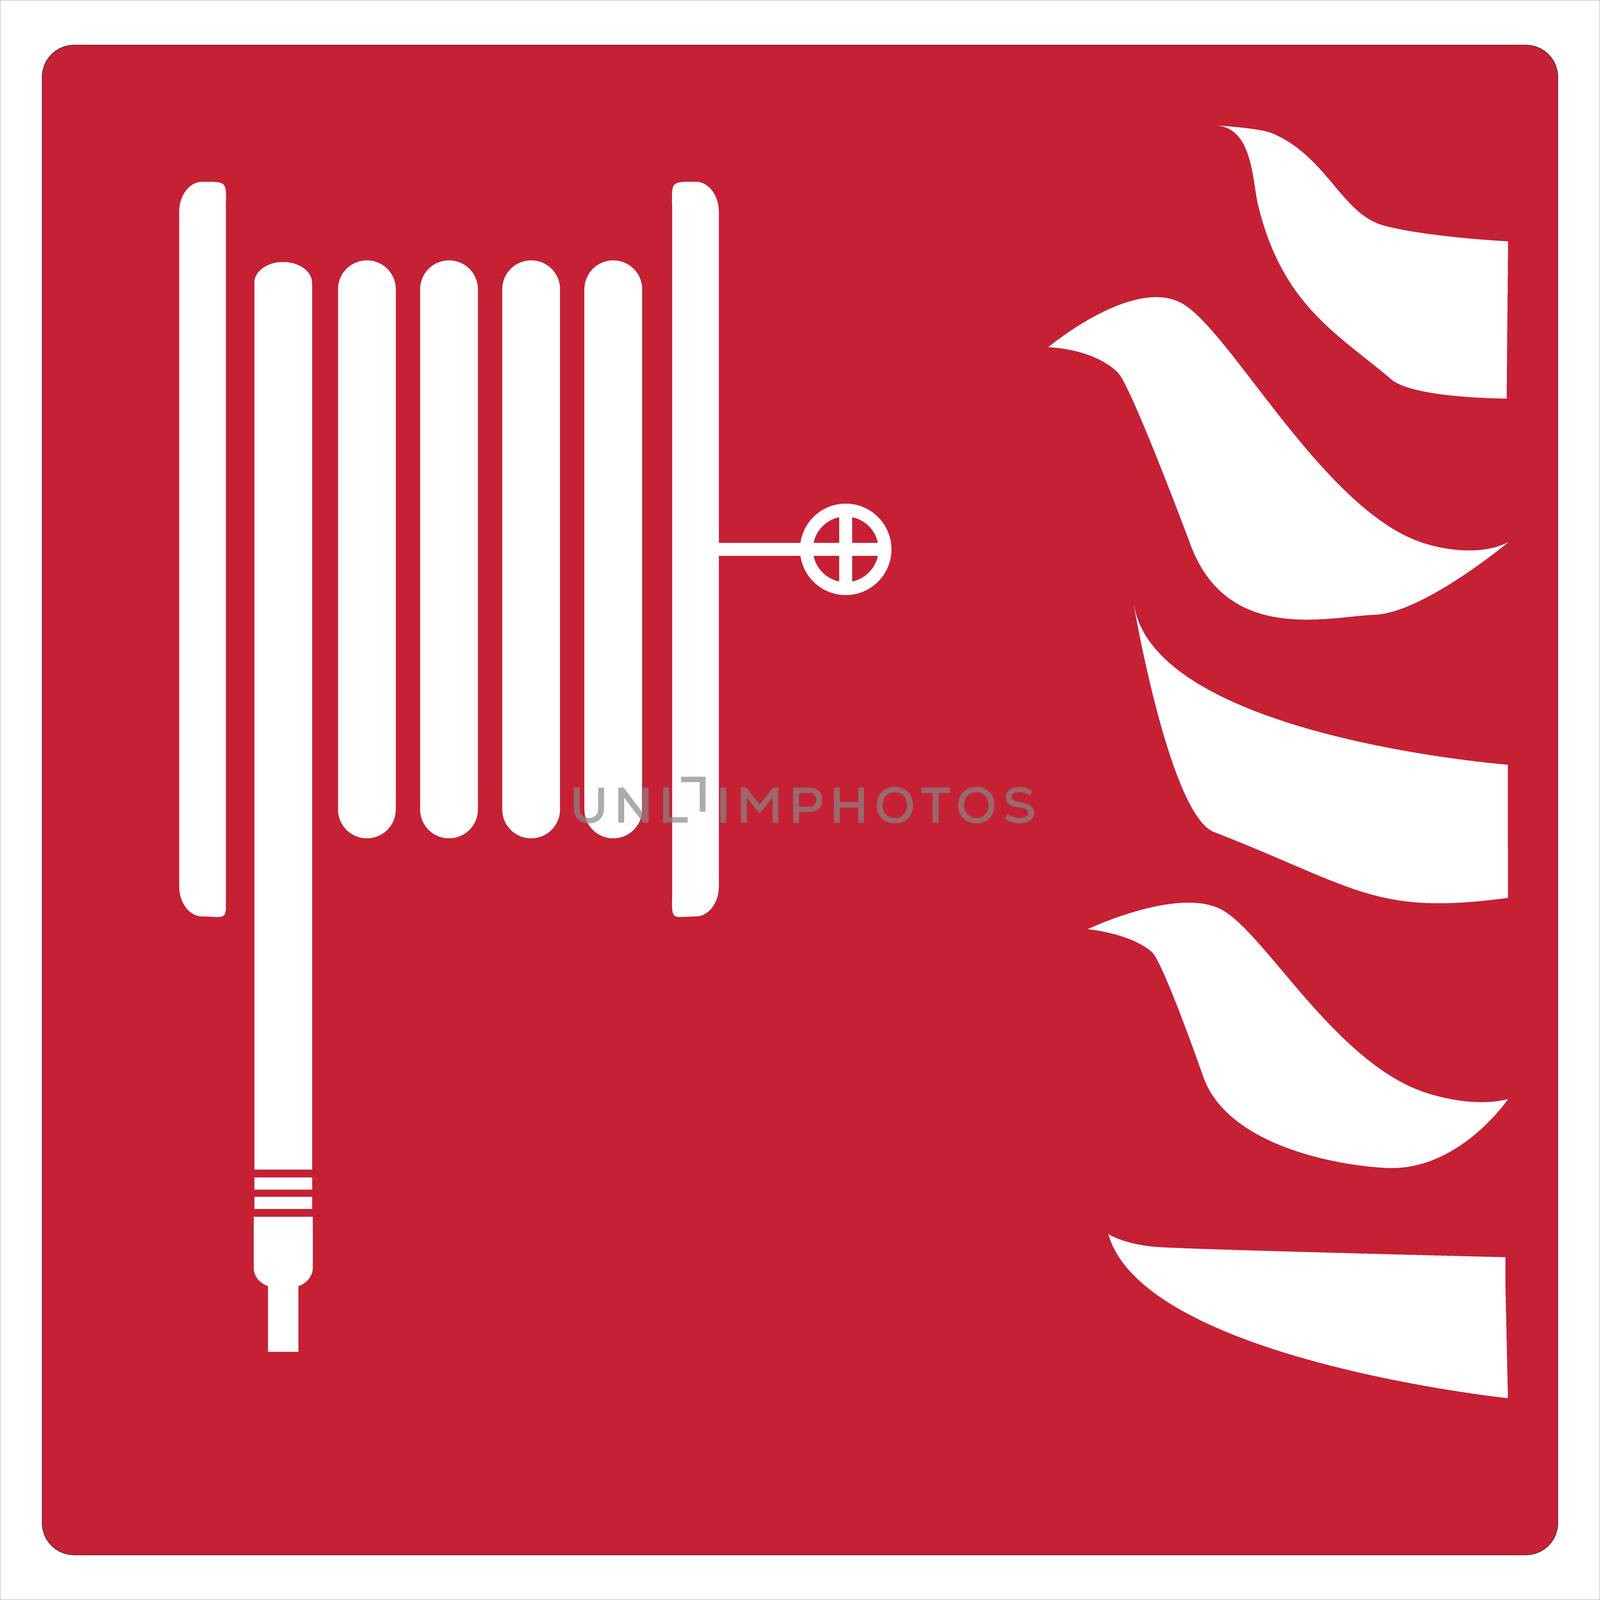 fire safety icon on white background. fire equipment sign. flat style design. safety symbol.